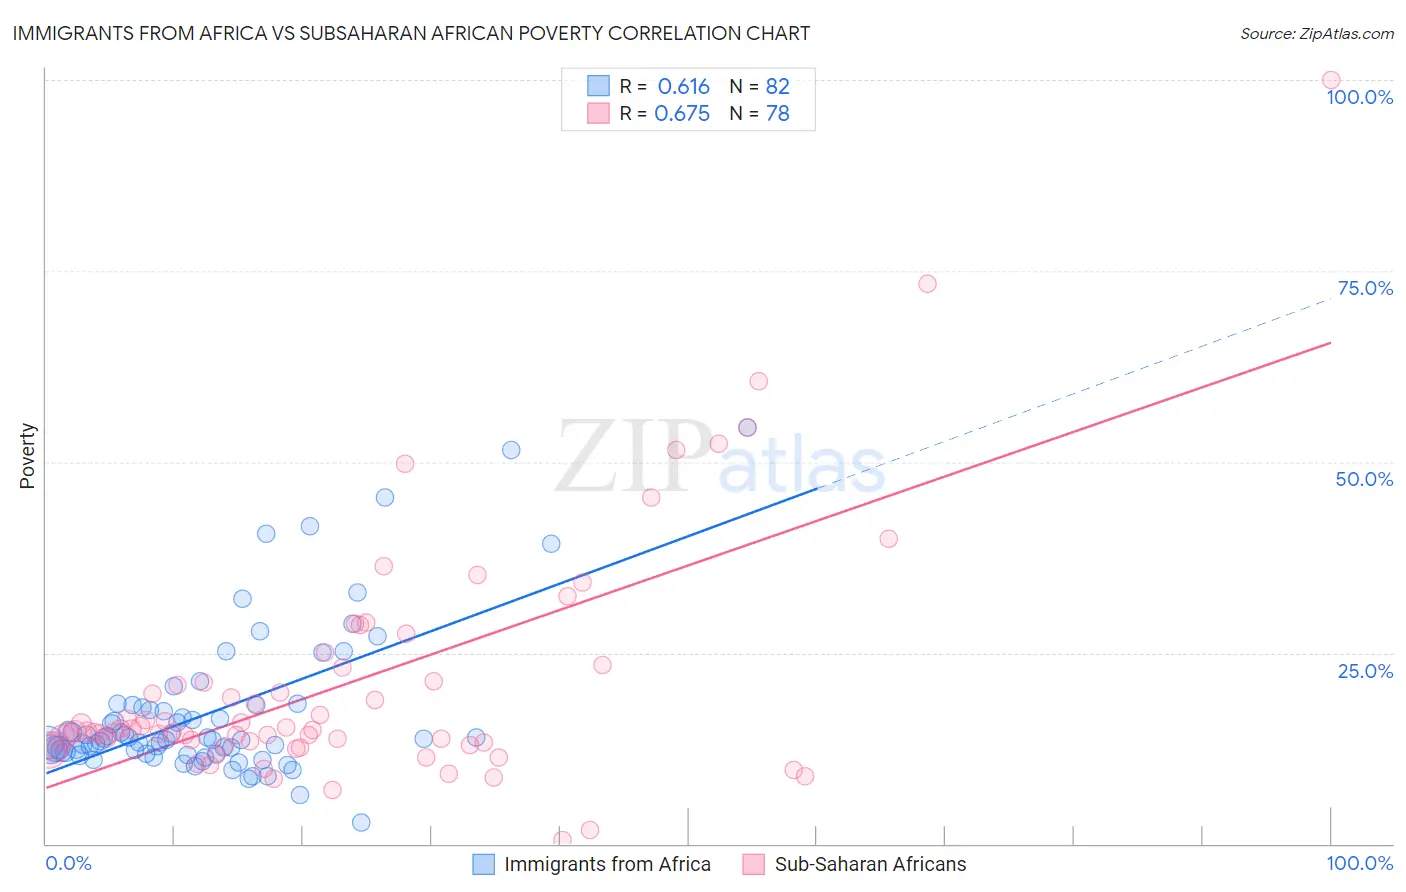 Immigrants from Africa vs Subsaharan African Poverty